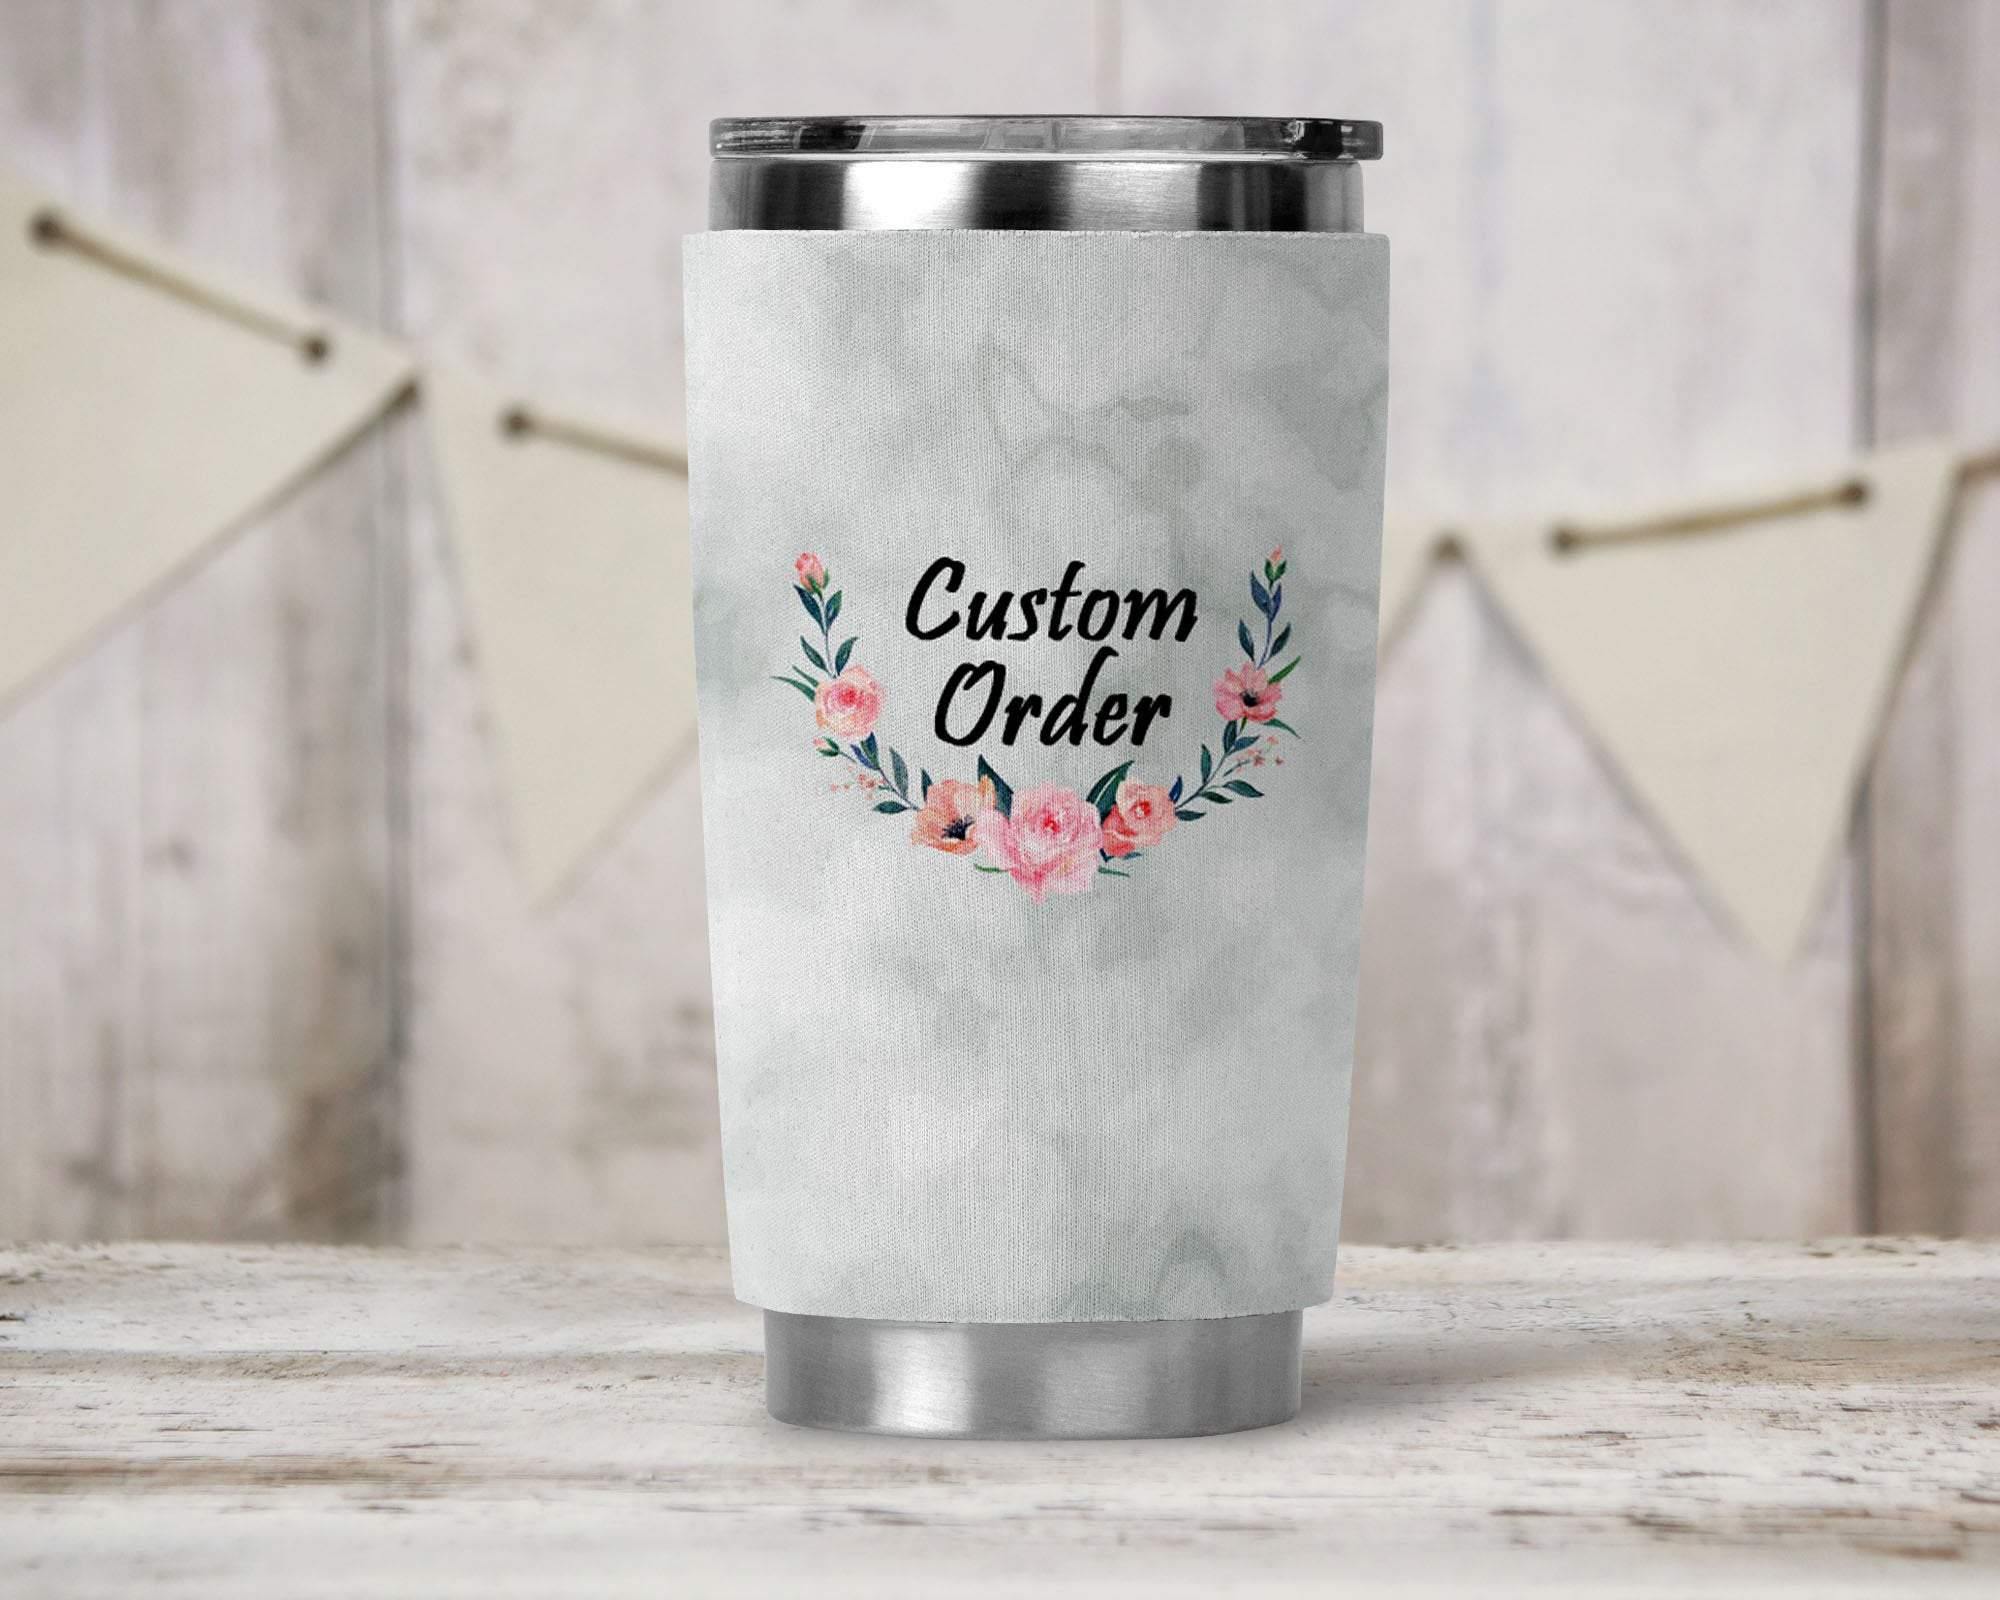 Personalized Yeti Wraps | Custom Yeti Accessories | Custom Order - This & That Solutions - Personalized Yeti Wraps | Custom Yeti Accessories | Custom Order - Personalized Gifts & Custom Home Decor